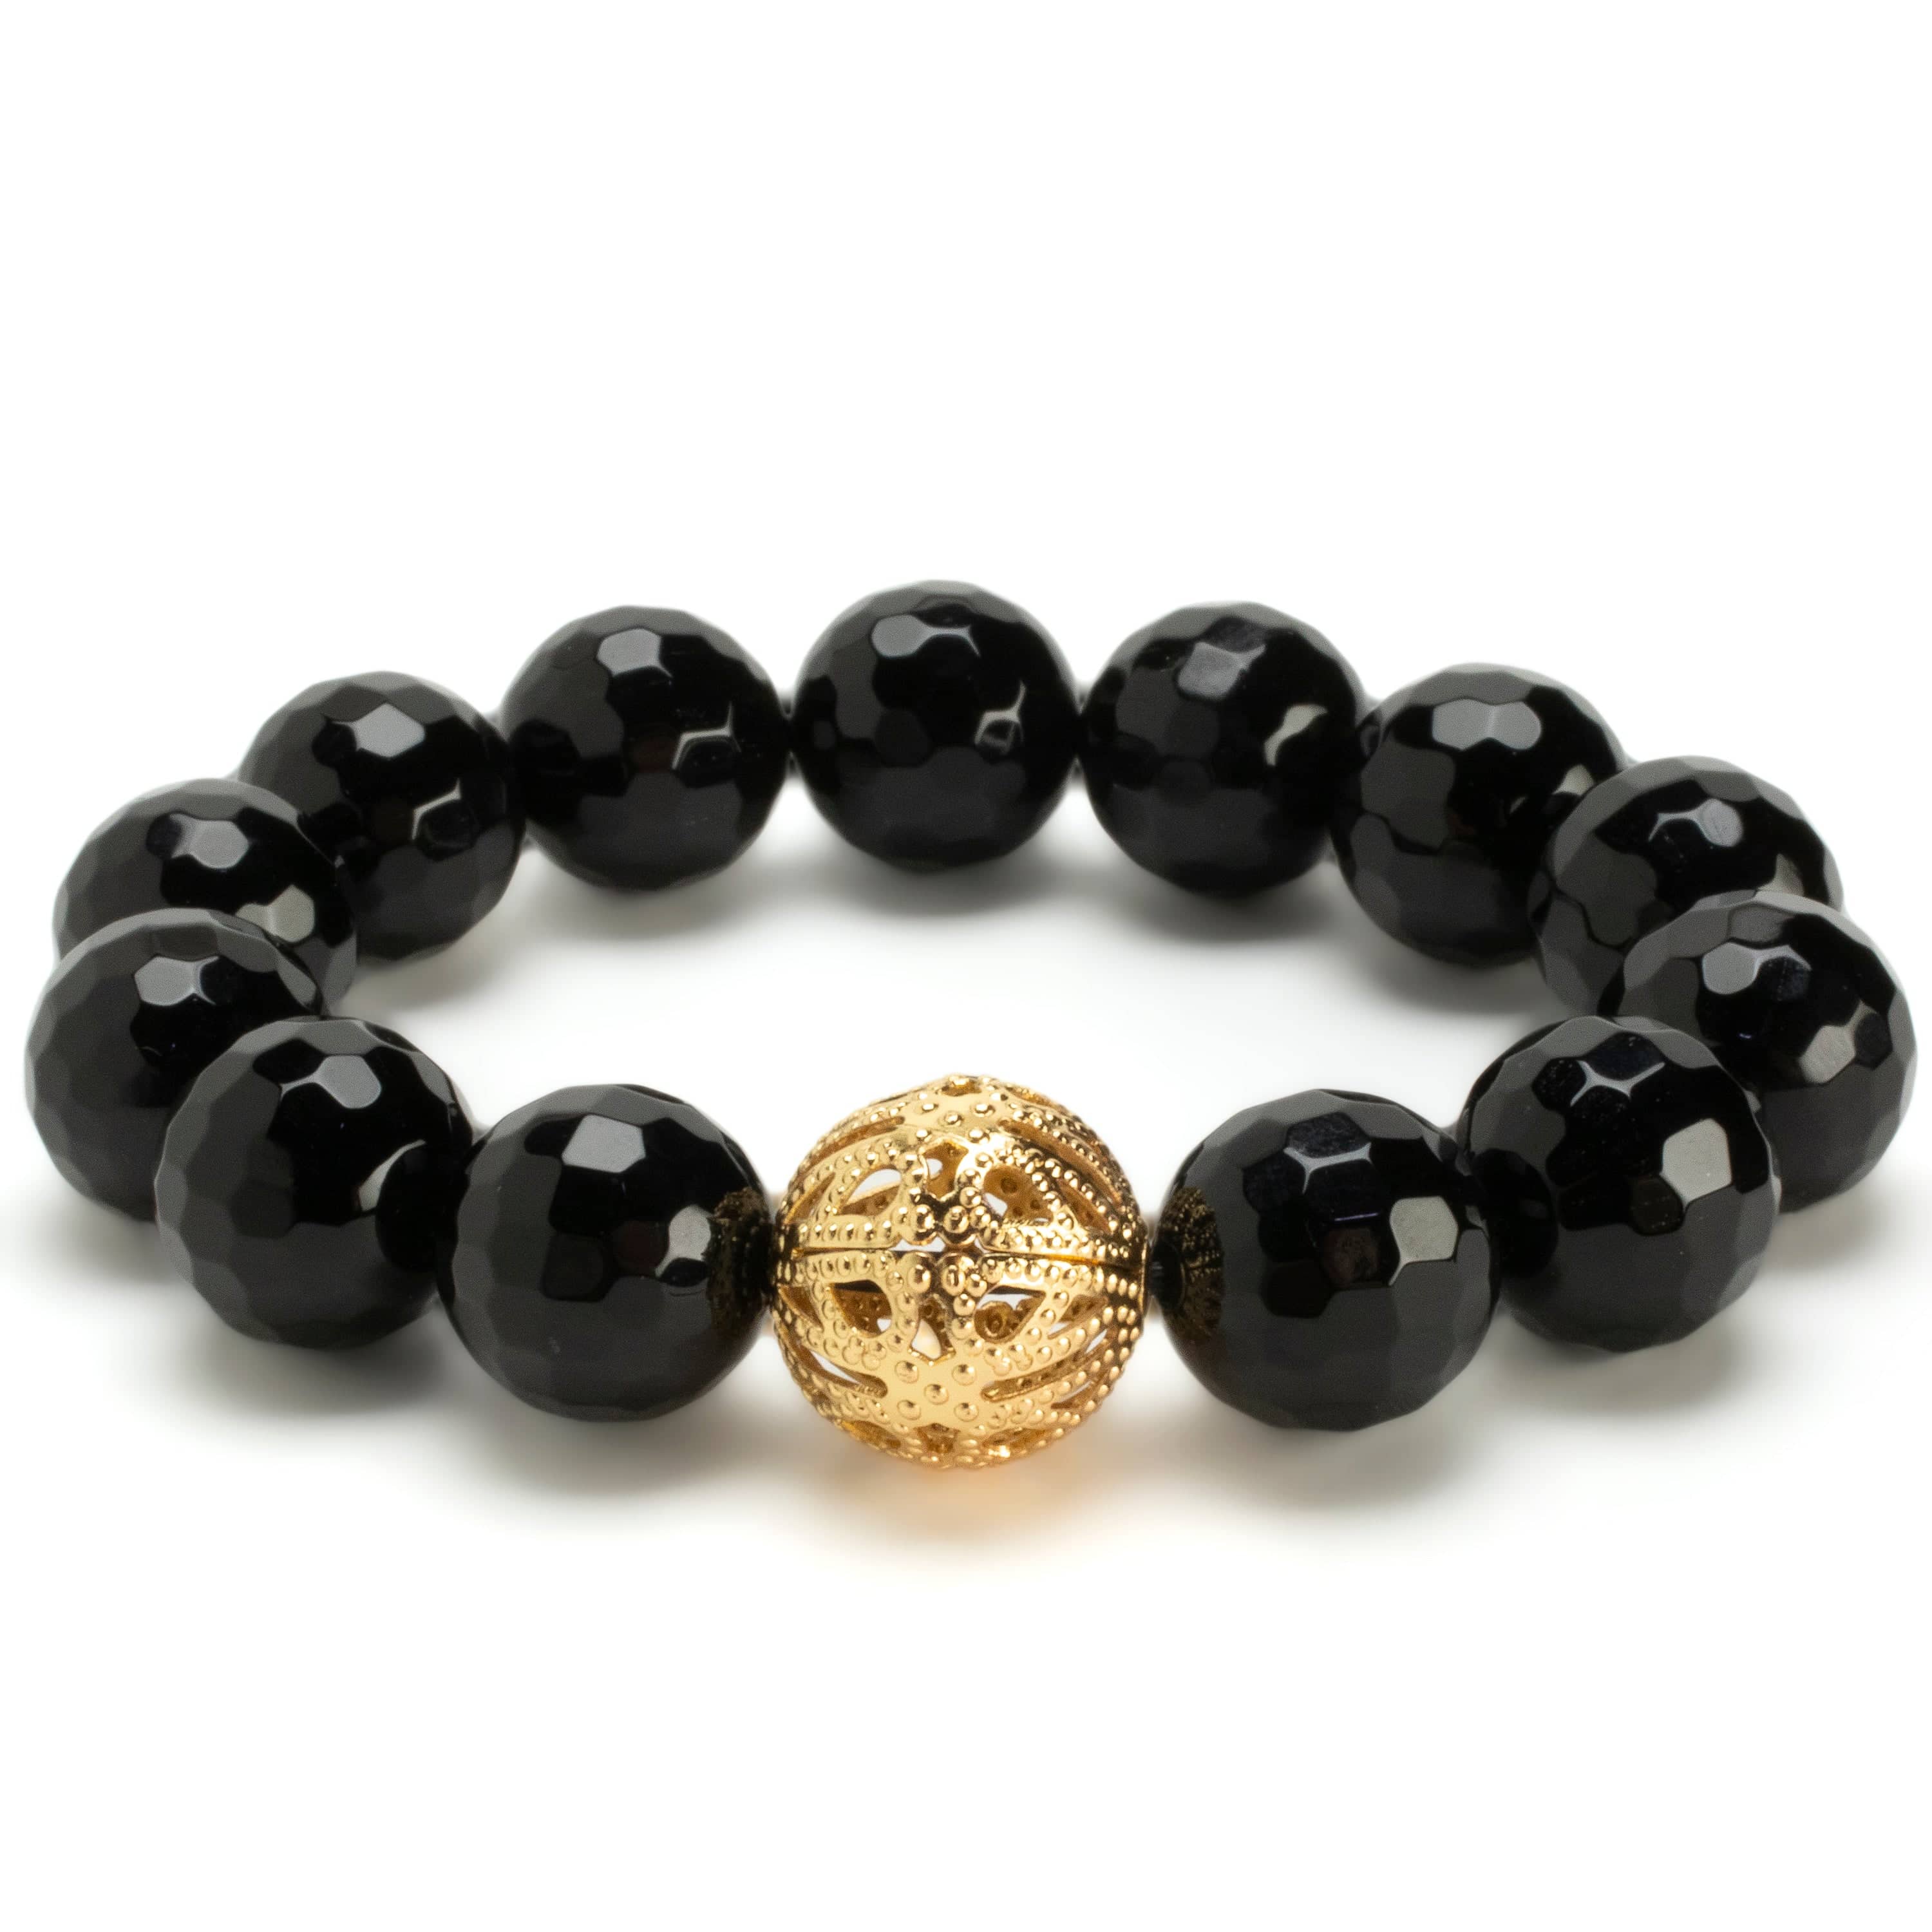 Faceted Black Agate 14mm Gemstone Bead Elastic Bracelet with Gold Accent  Bead